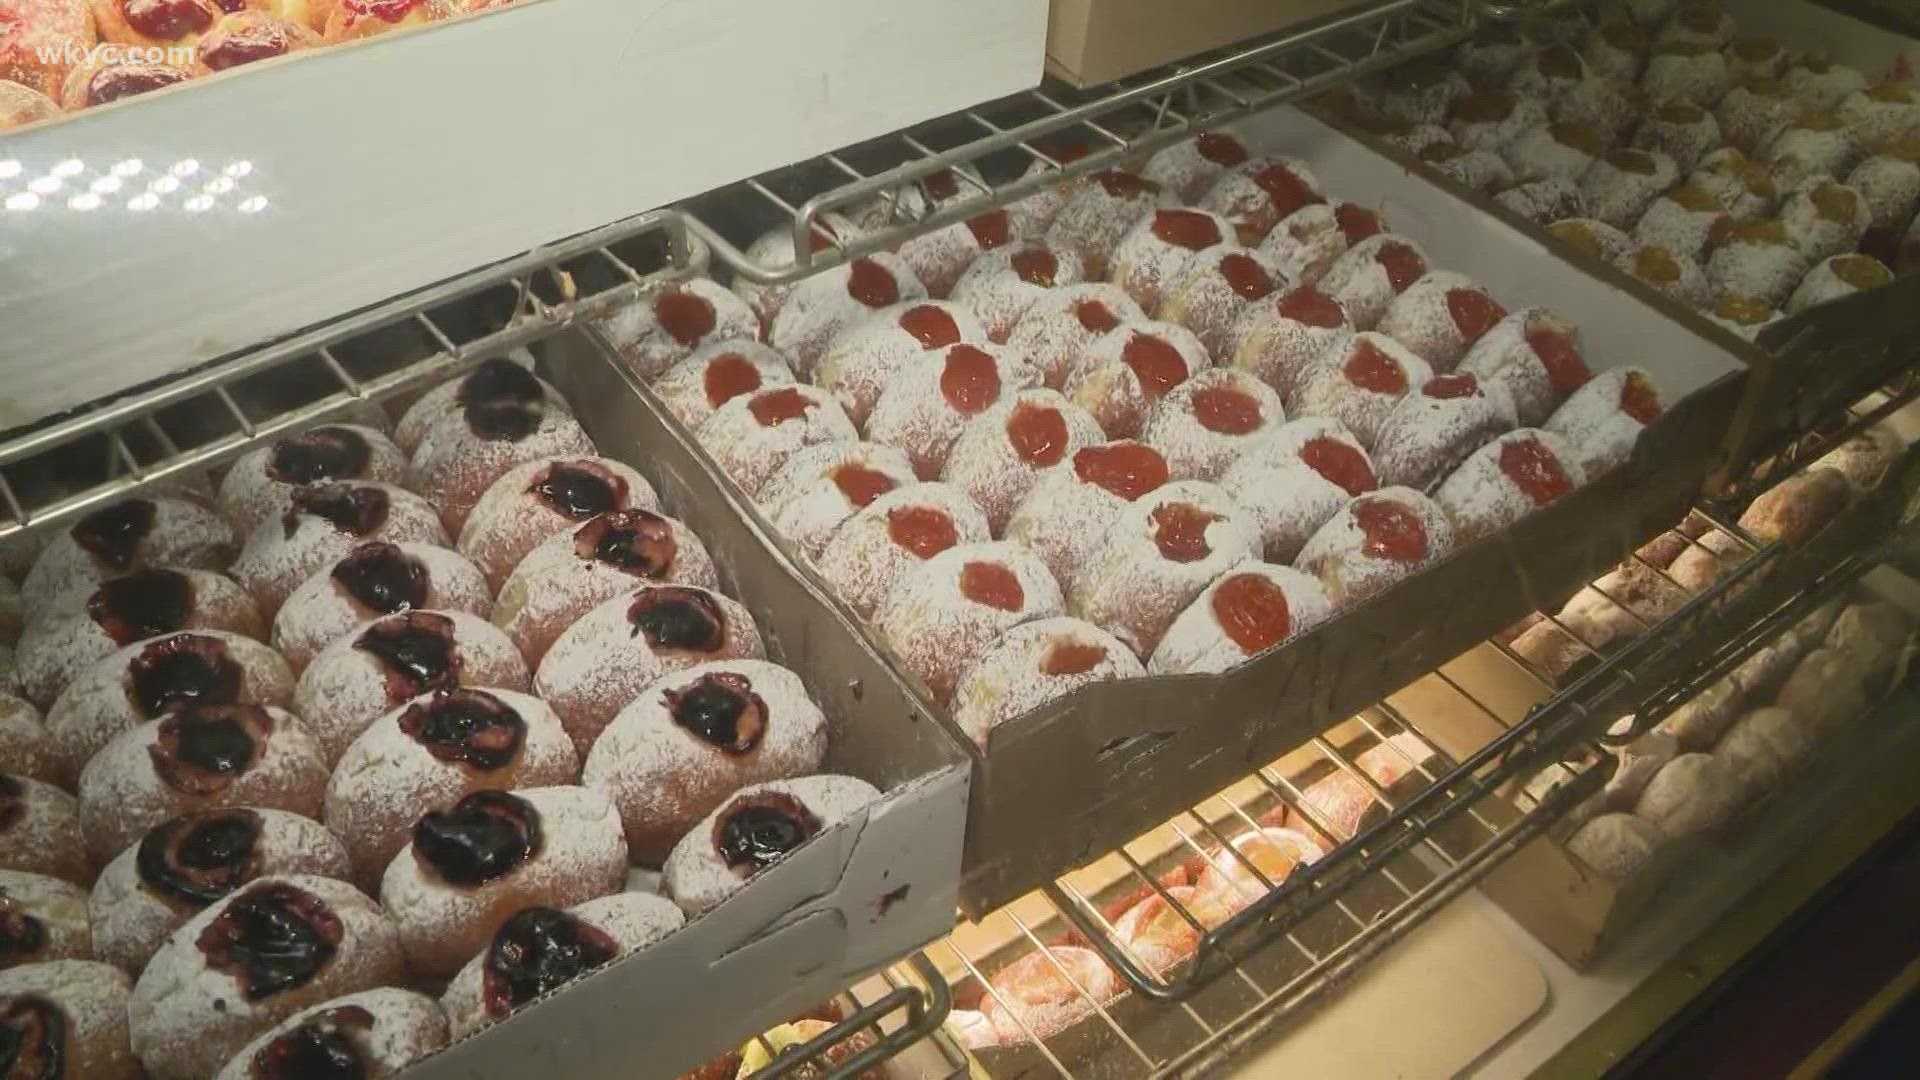 Rudy's Strudel and Bakery in Parma is planning to serve up 75,000 paczki in celebration of Fat Tuesday.